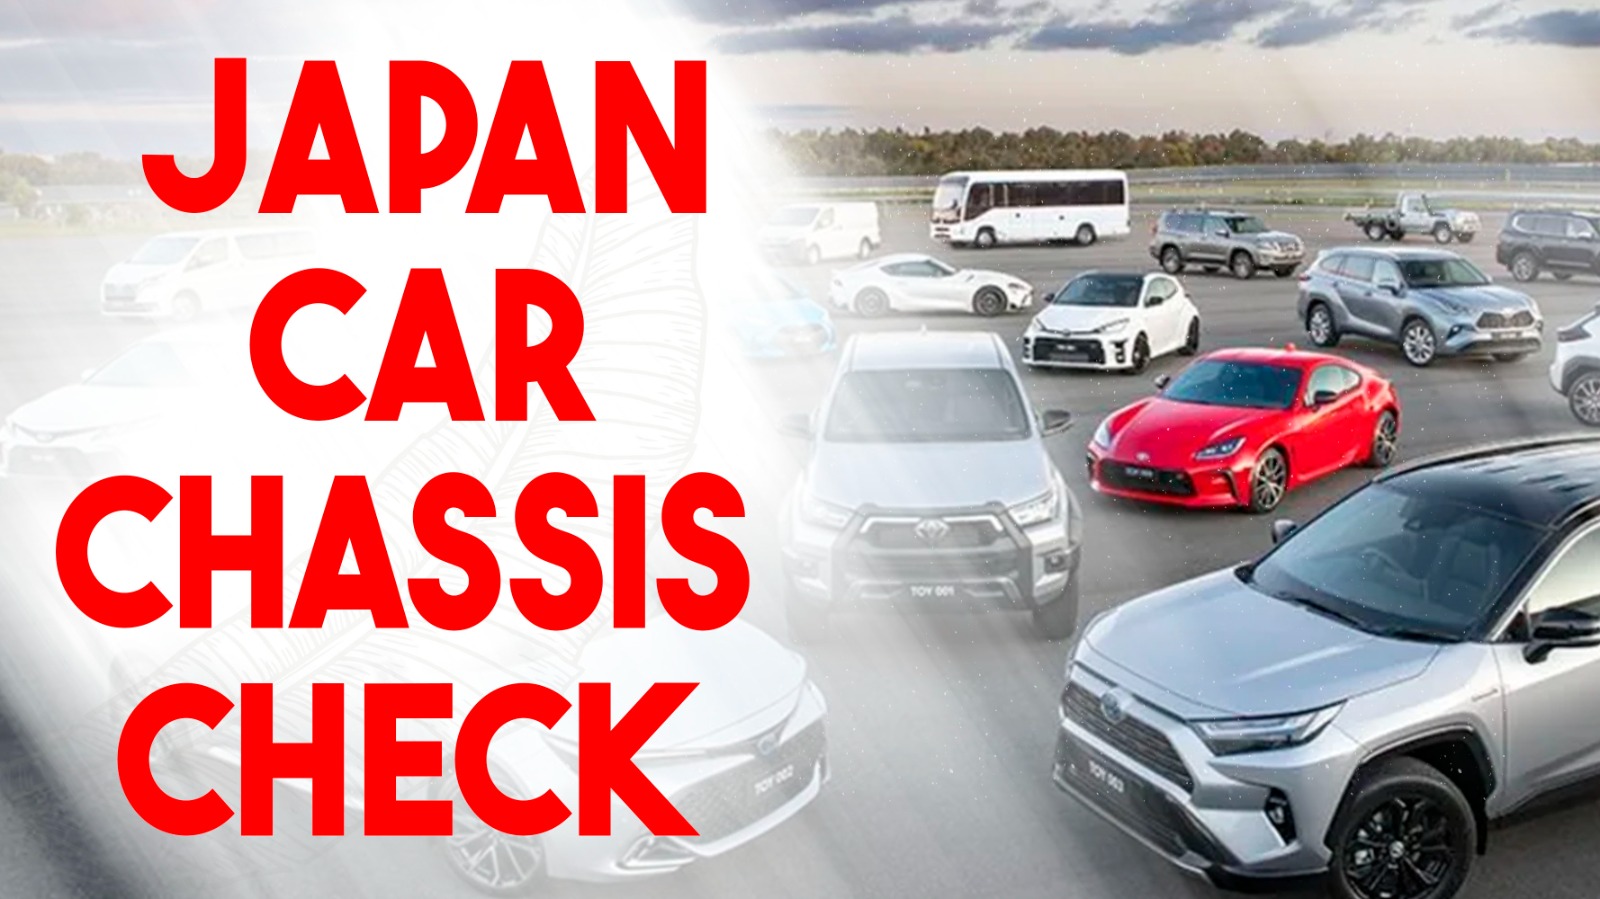 Road-Worthy Confidence: A Quick Guide to Japan Car Chassis Checks